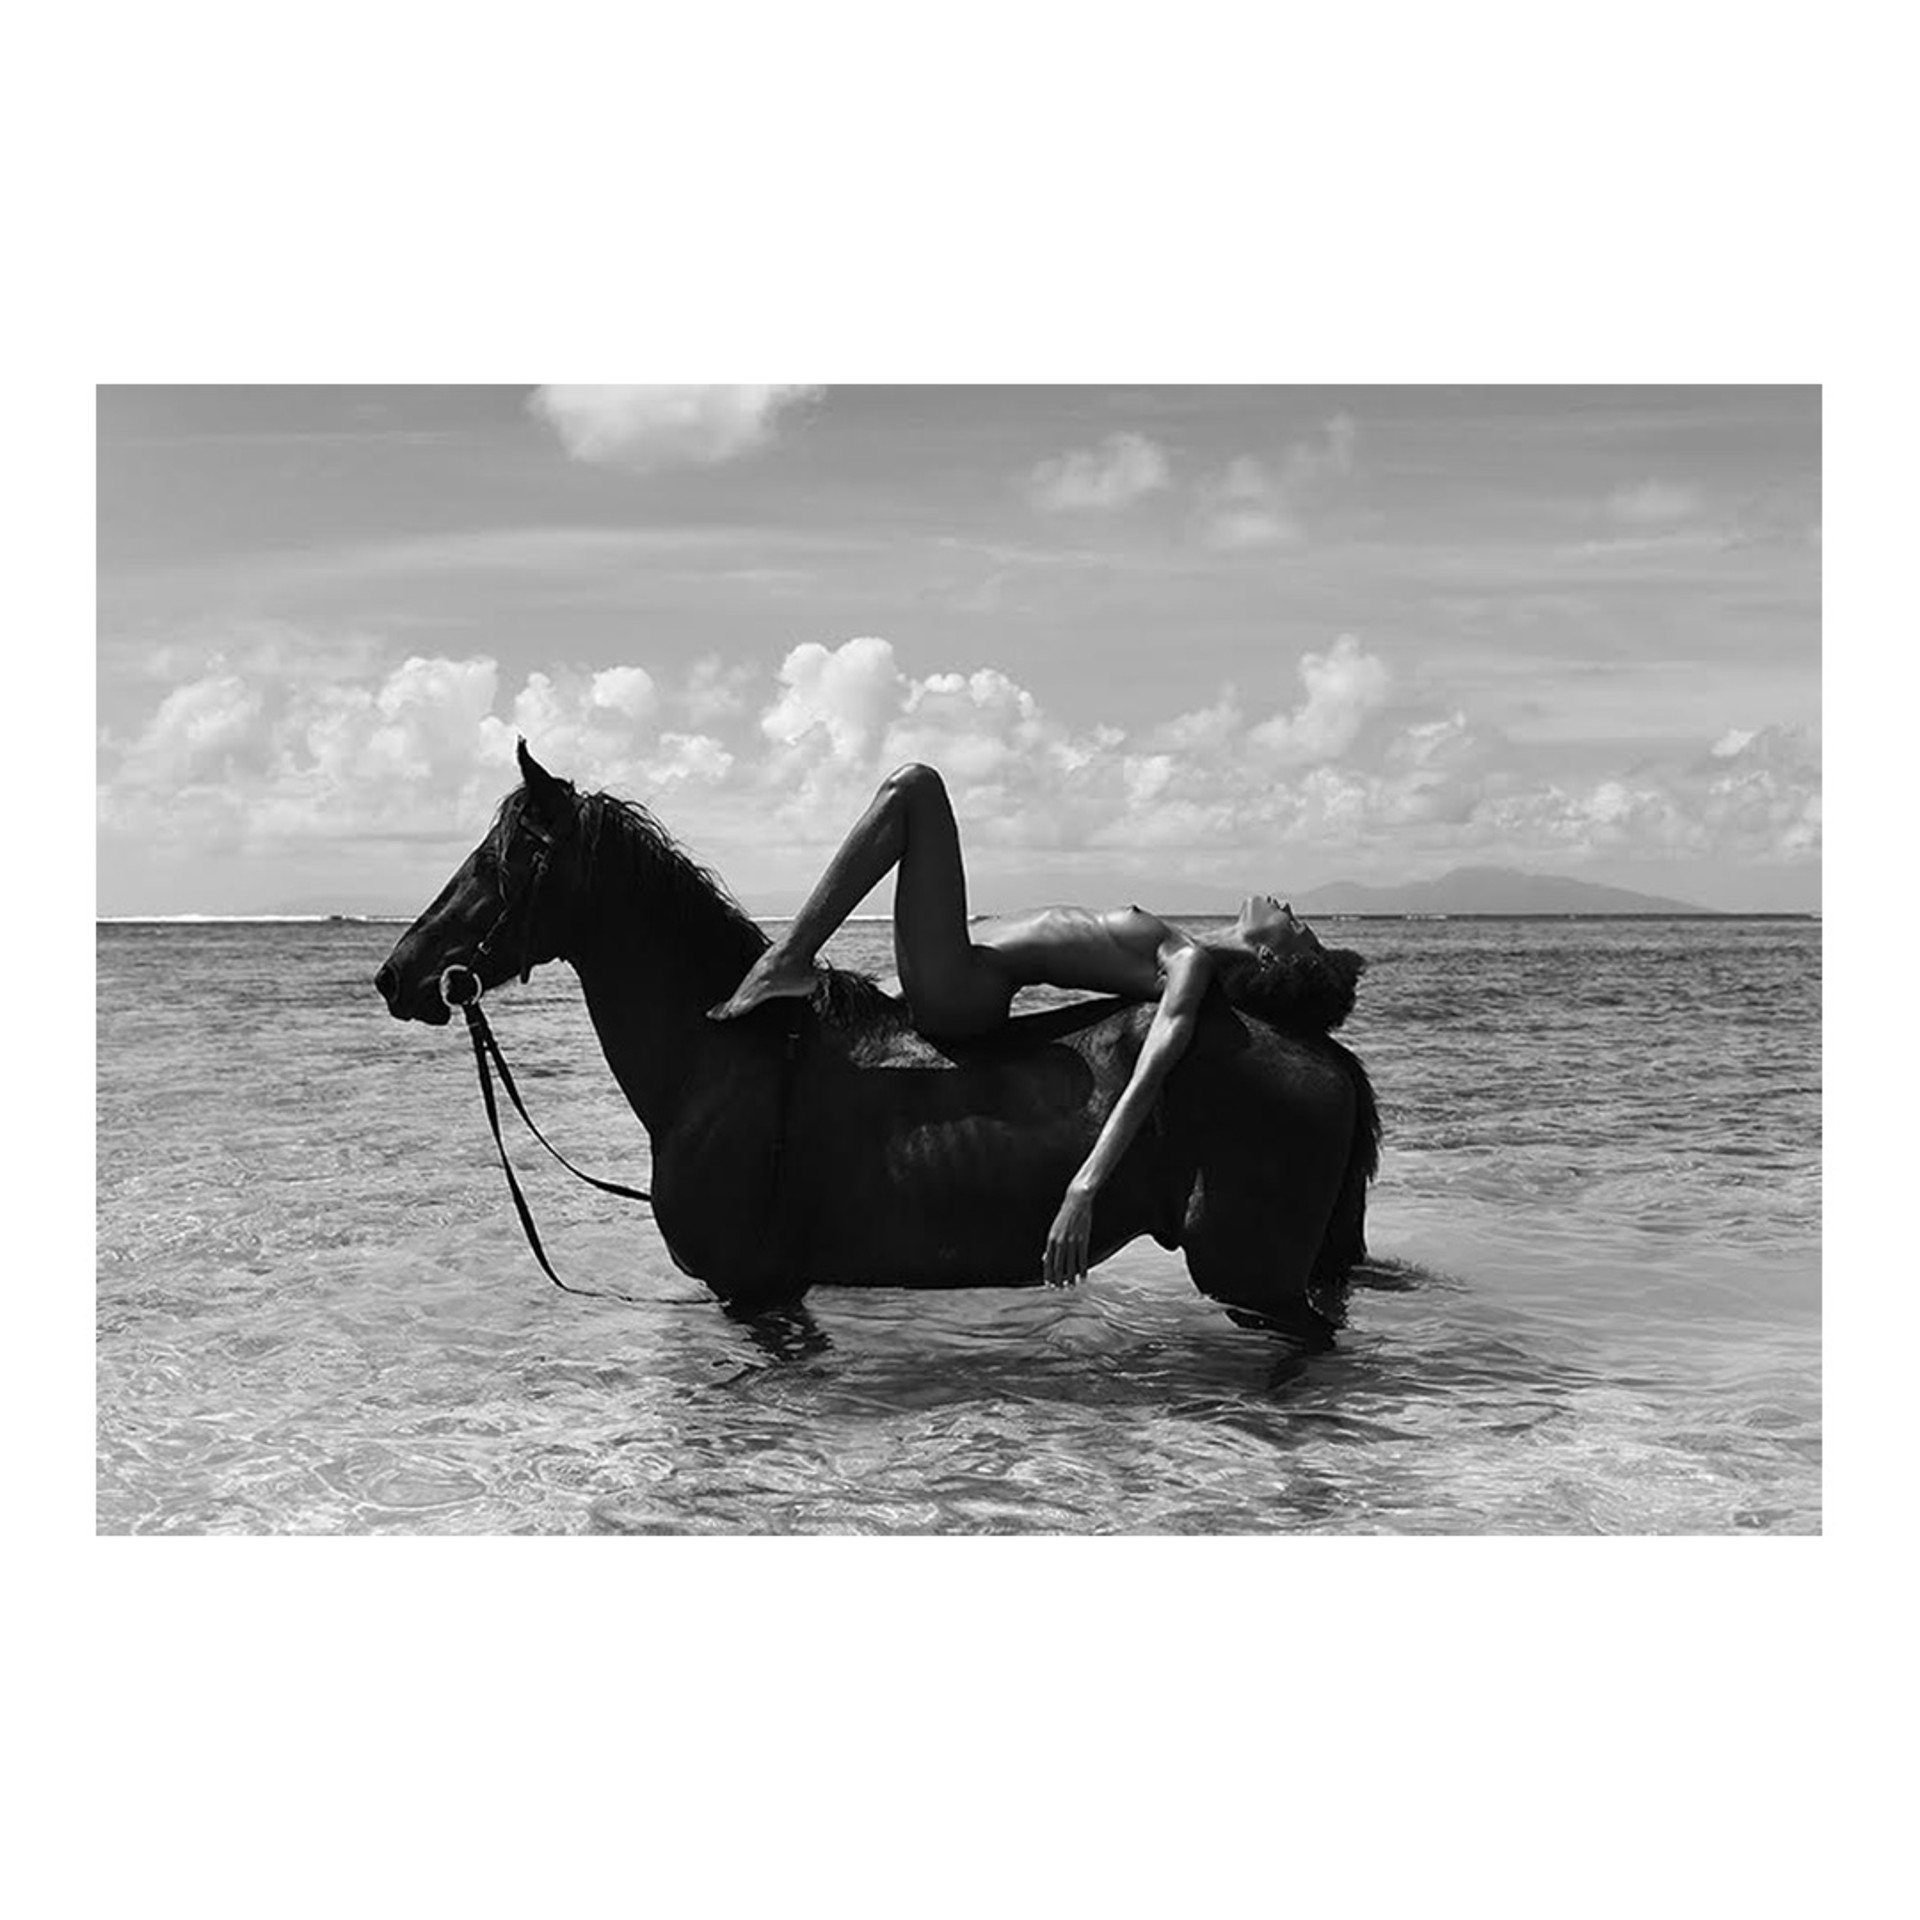 Horse and woman (Bahamas) [black & white] by Jean-Philippe Piter